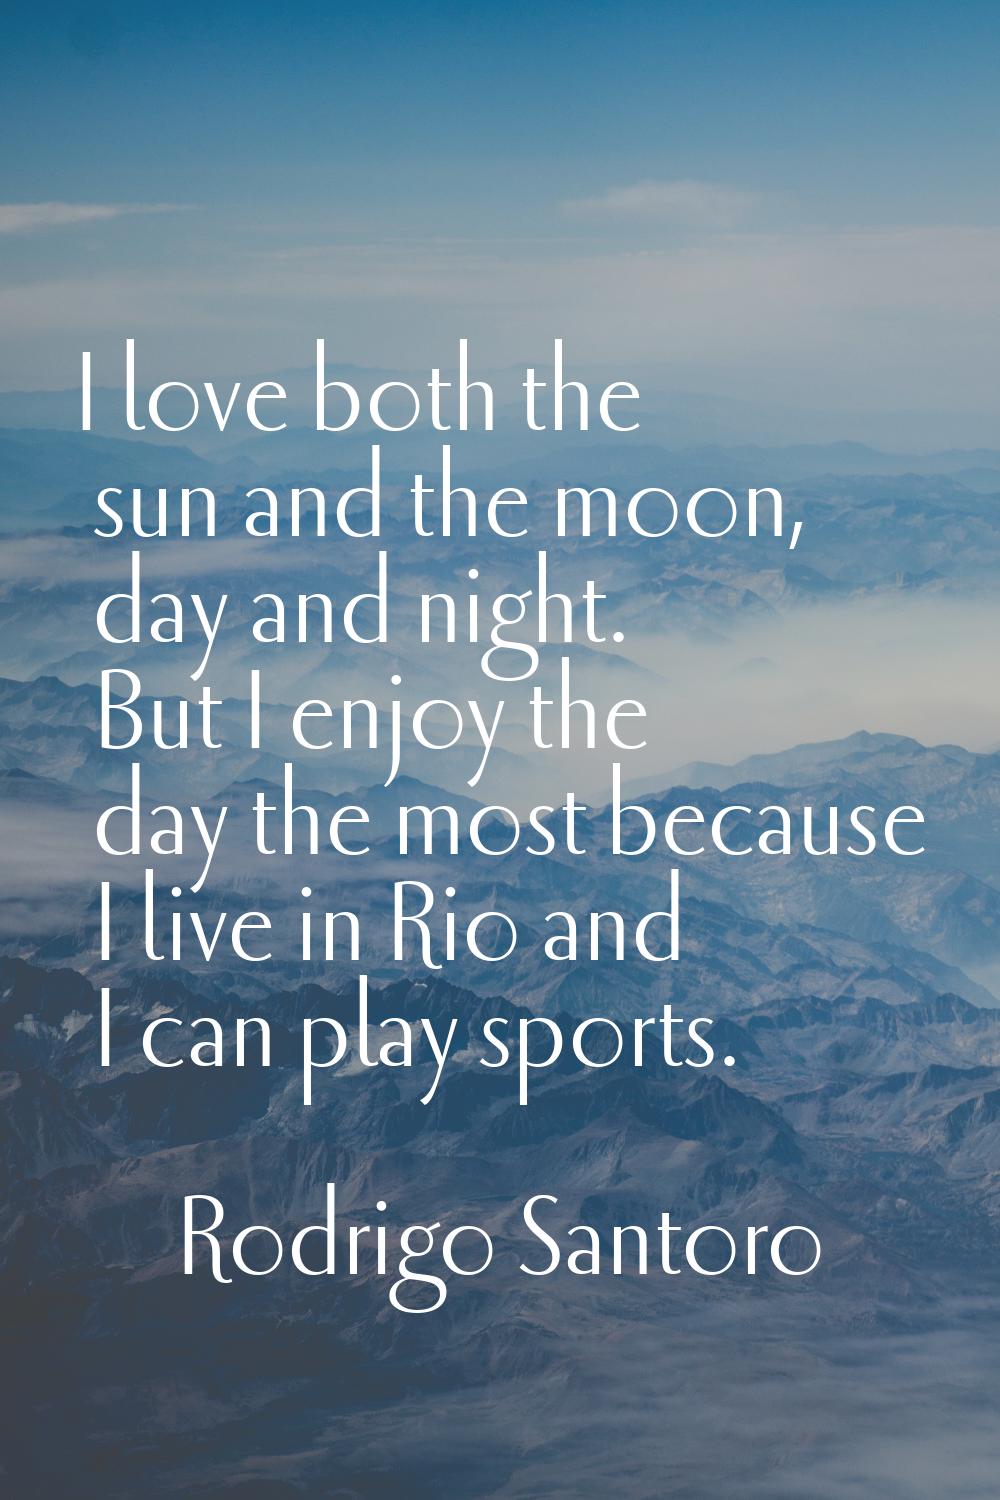 I love both the sun and the moon, day and night. But I enjoy the day the most because I live in Rio